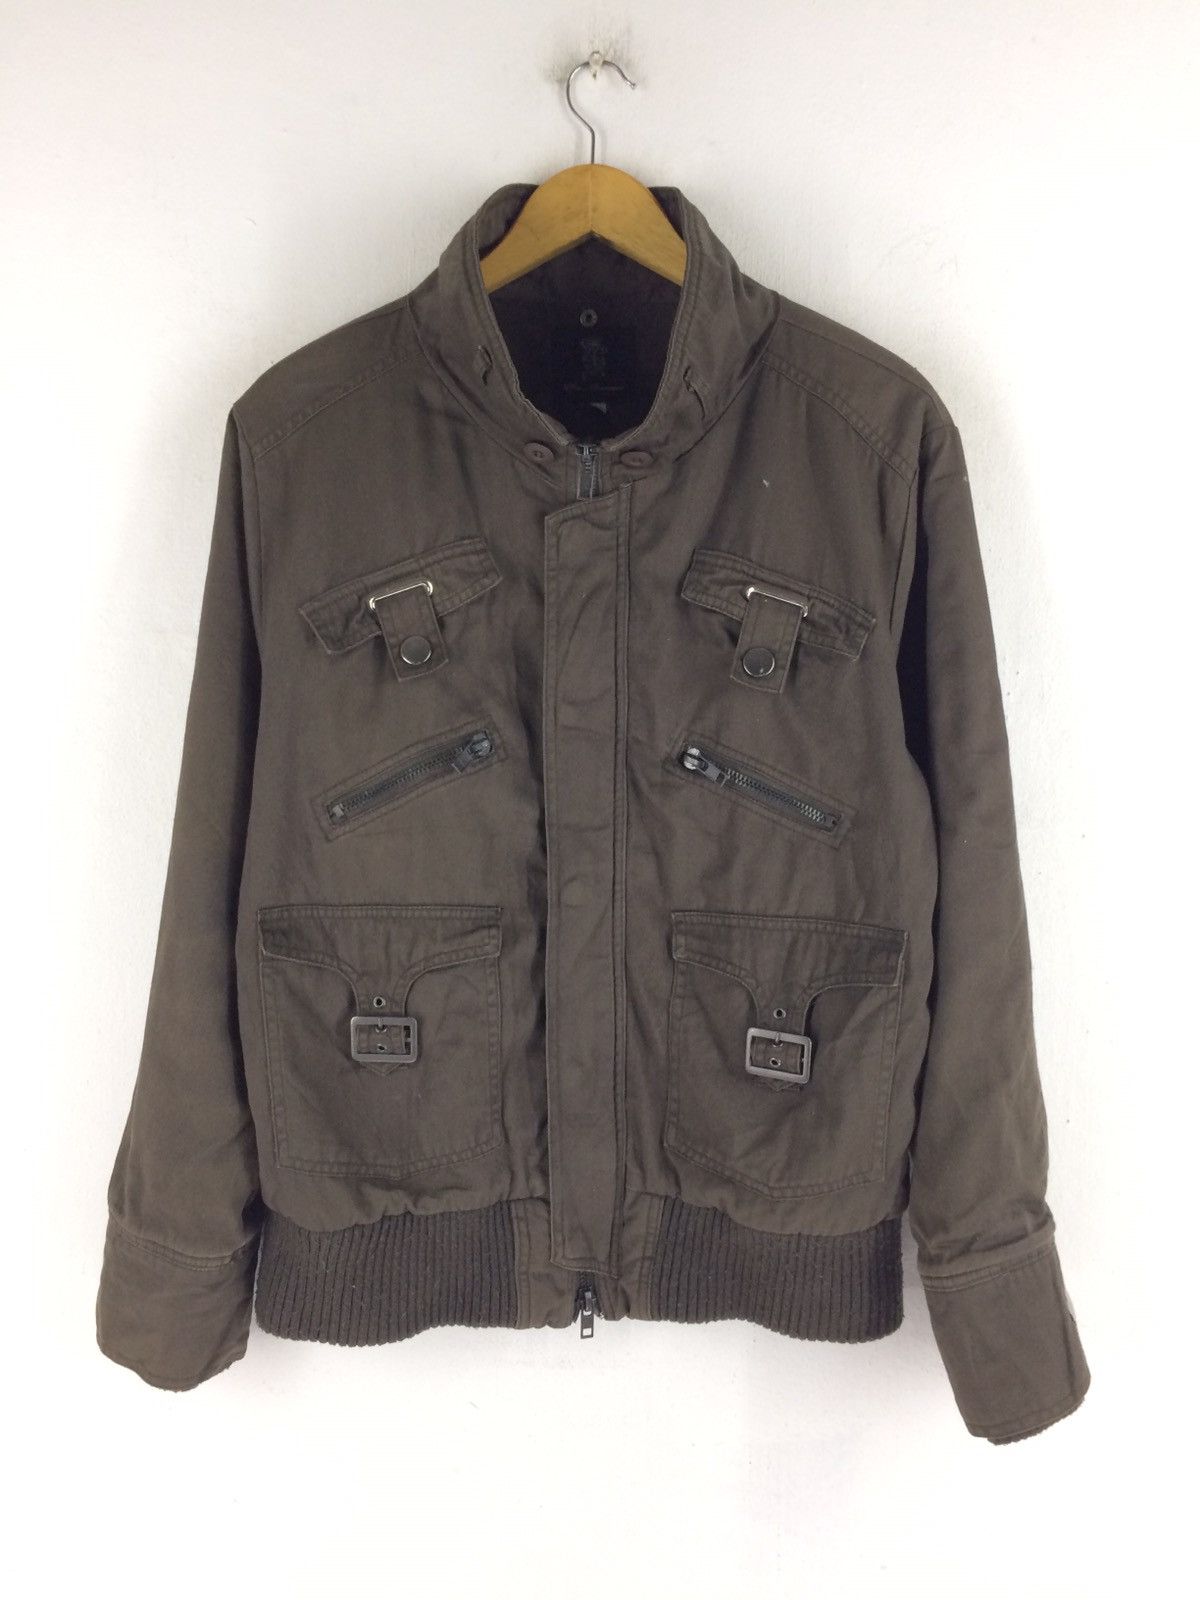 Japanese Brand slimee fiunecise multipocket military style jacket | Grailed